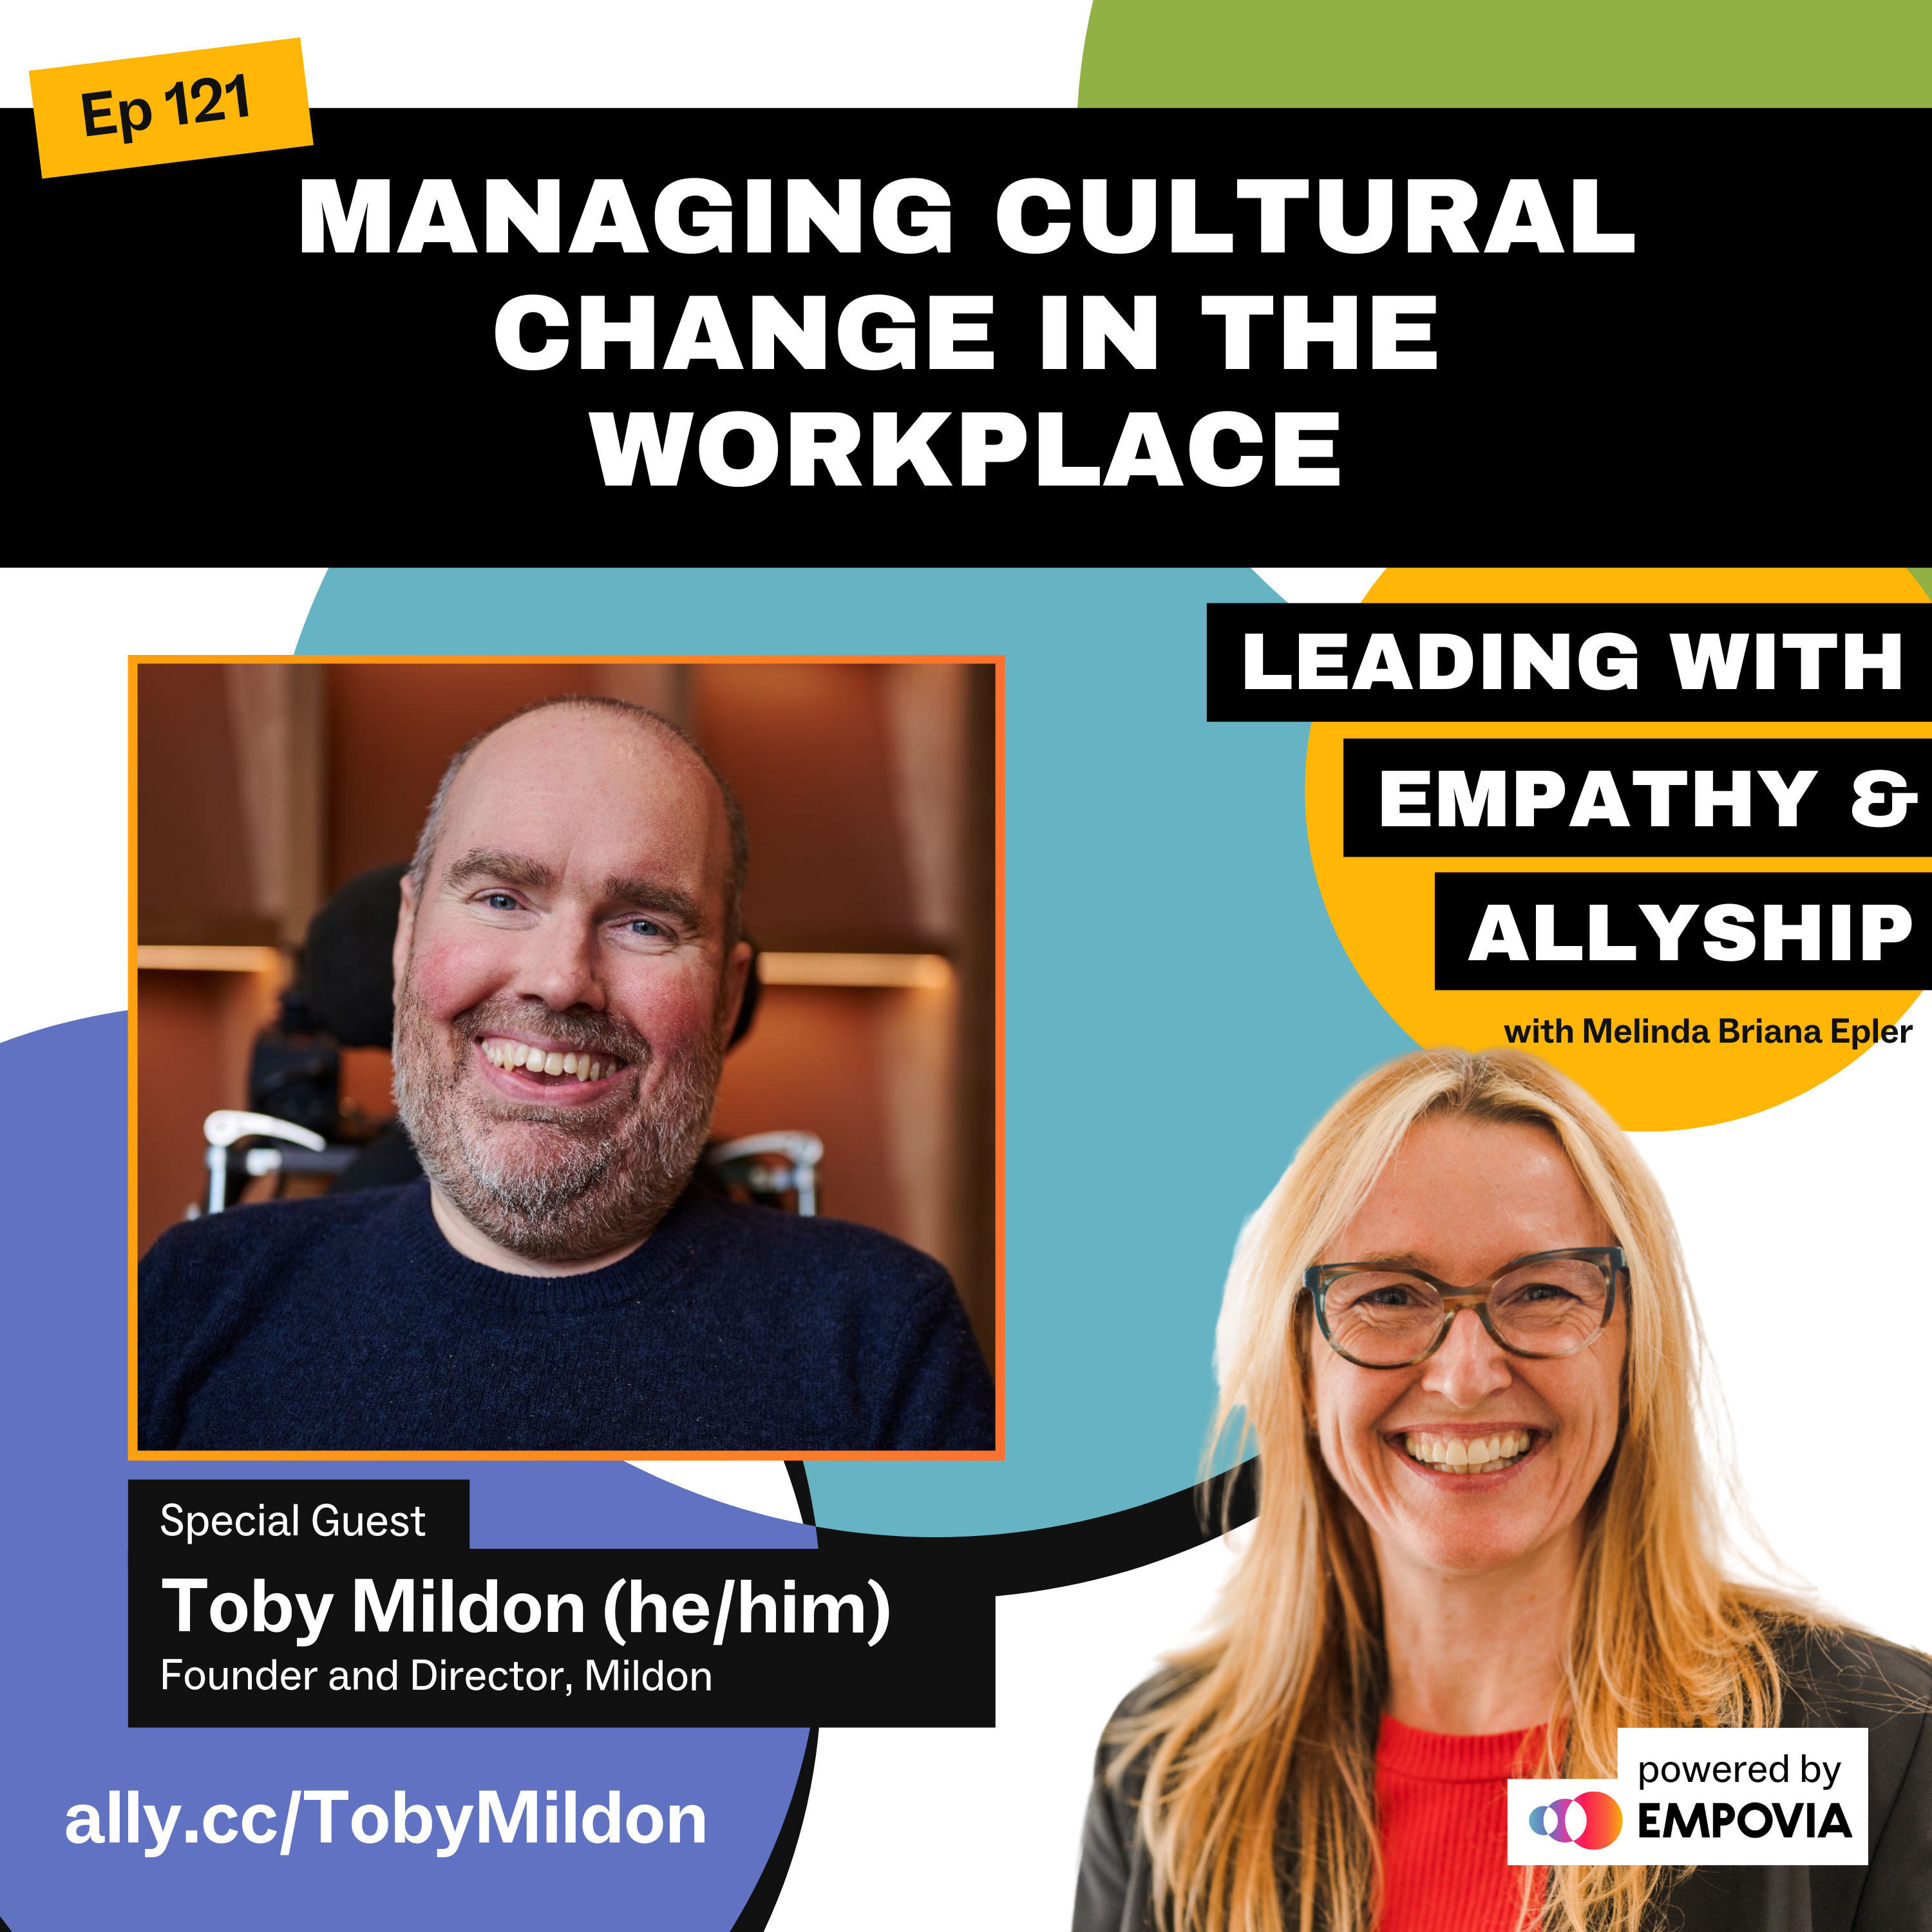 Leading With Empathy & Allyship promo and photos of Toby Mildon, a White man sitting in an electric wheelchair with low haircut, salt and pepper beard, and navy blue long-sleeve shirt; and host Melinda Briana Epler, a White woman with blonde and red hair, glasses, red shirt, and black jacket.